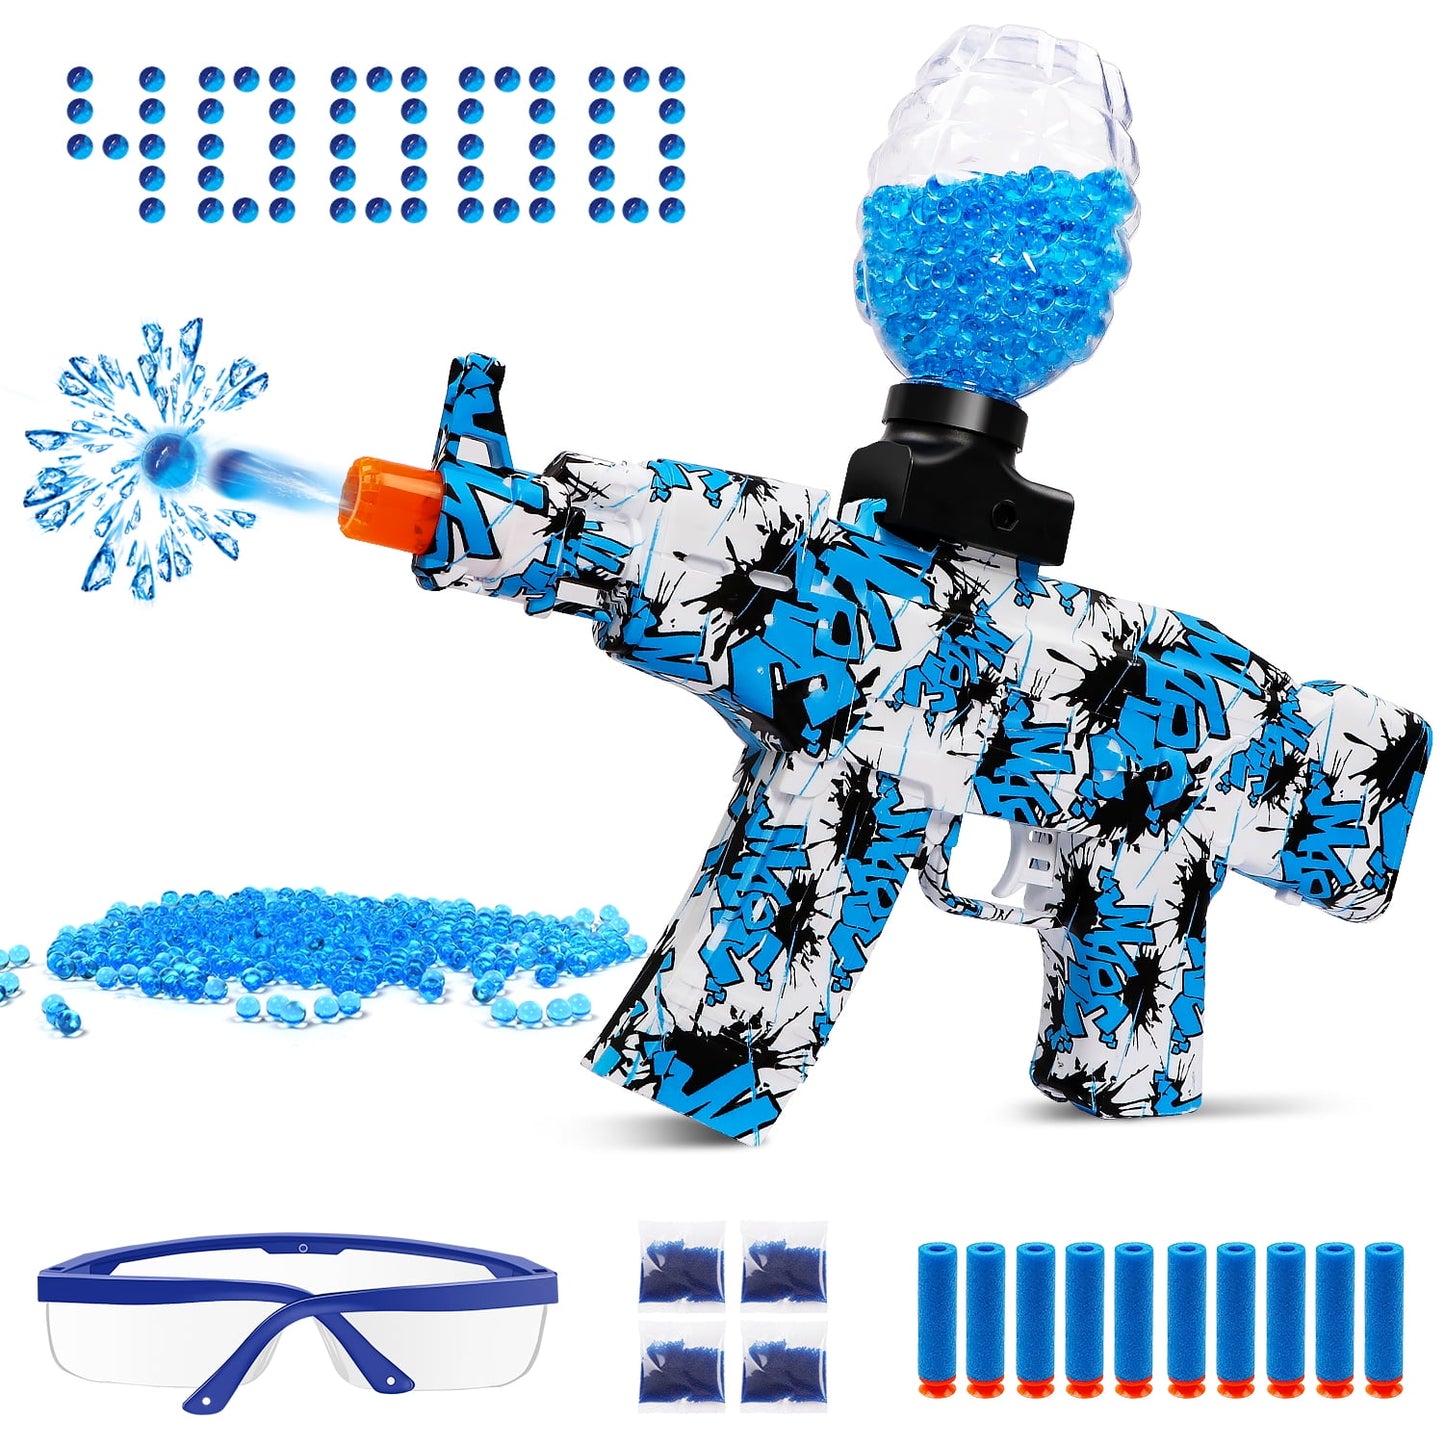 Gel Blaster Kit, Rechargeable Electric Gel Blaster Outdoor Activities Games for Kids Boys and Girls Age 12+